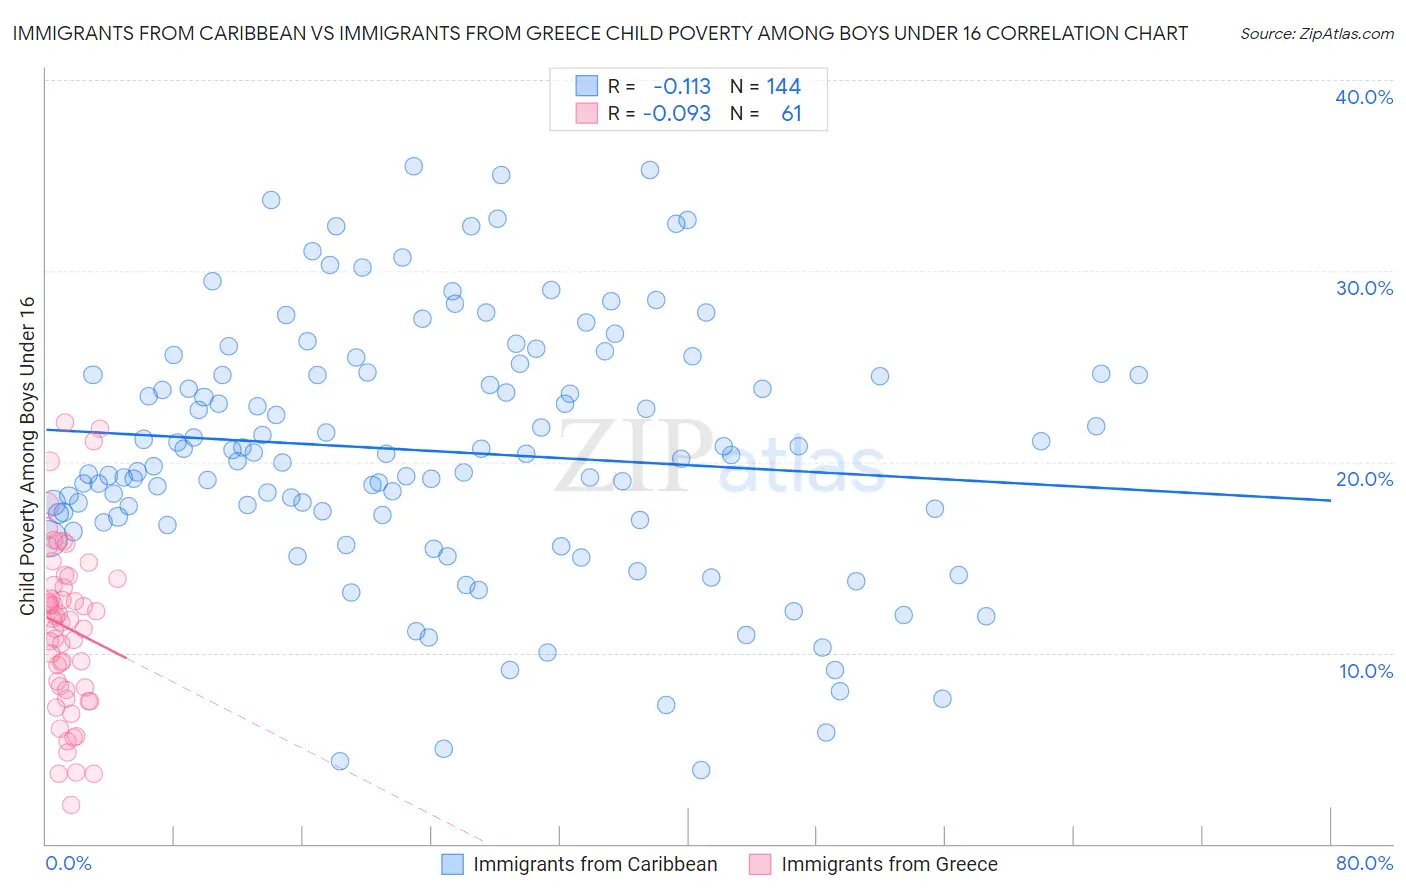 Immigrants from Caribbean vs Immigrants from Greece Child Poverty Among Boys Under 16